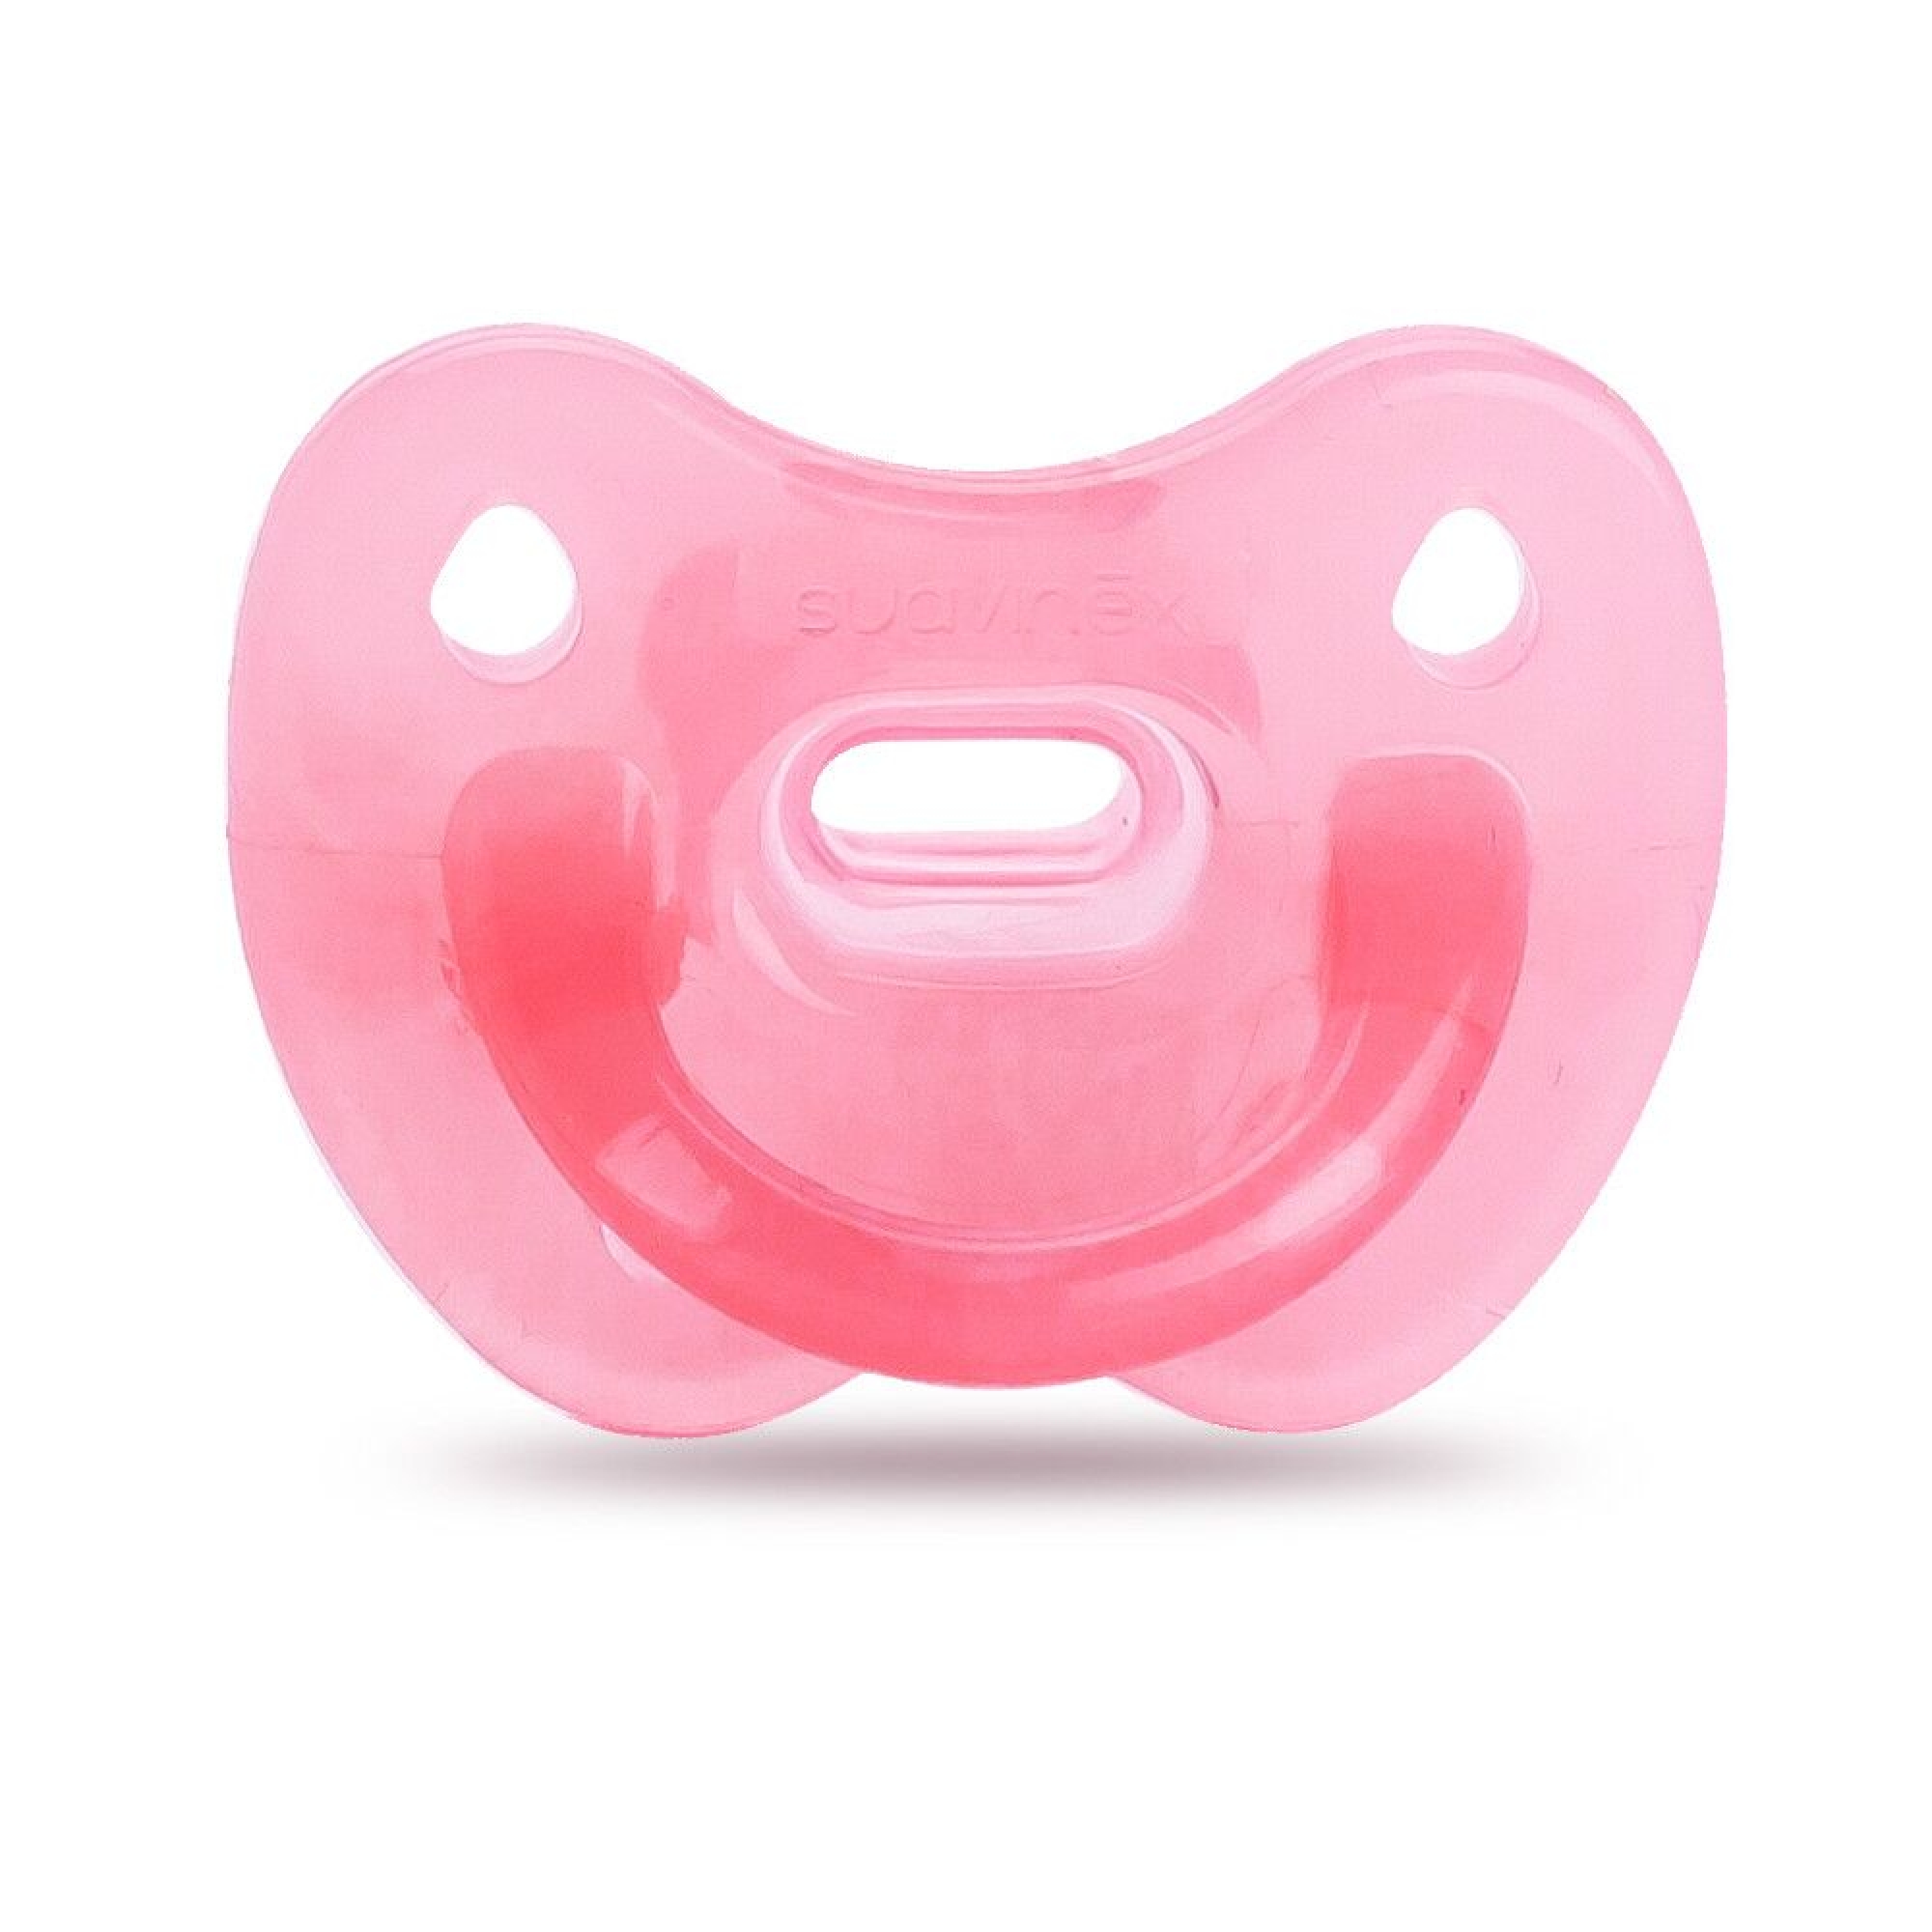 Suavinex Sucette Physiologique Silicone 6 18 Mois Rose Made In Bebe